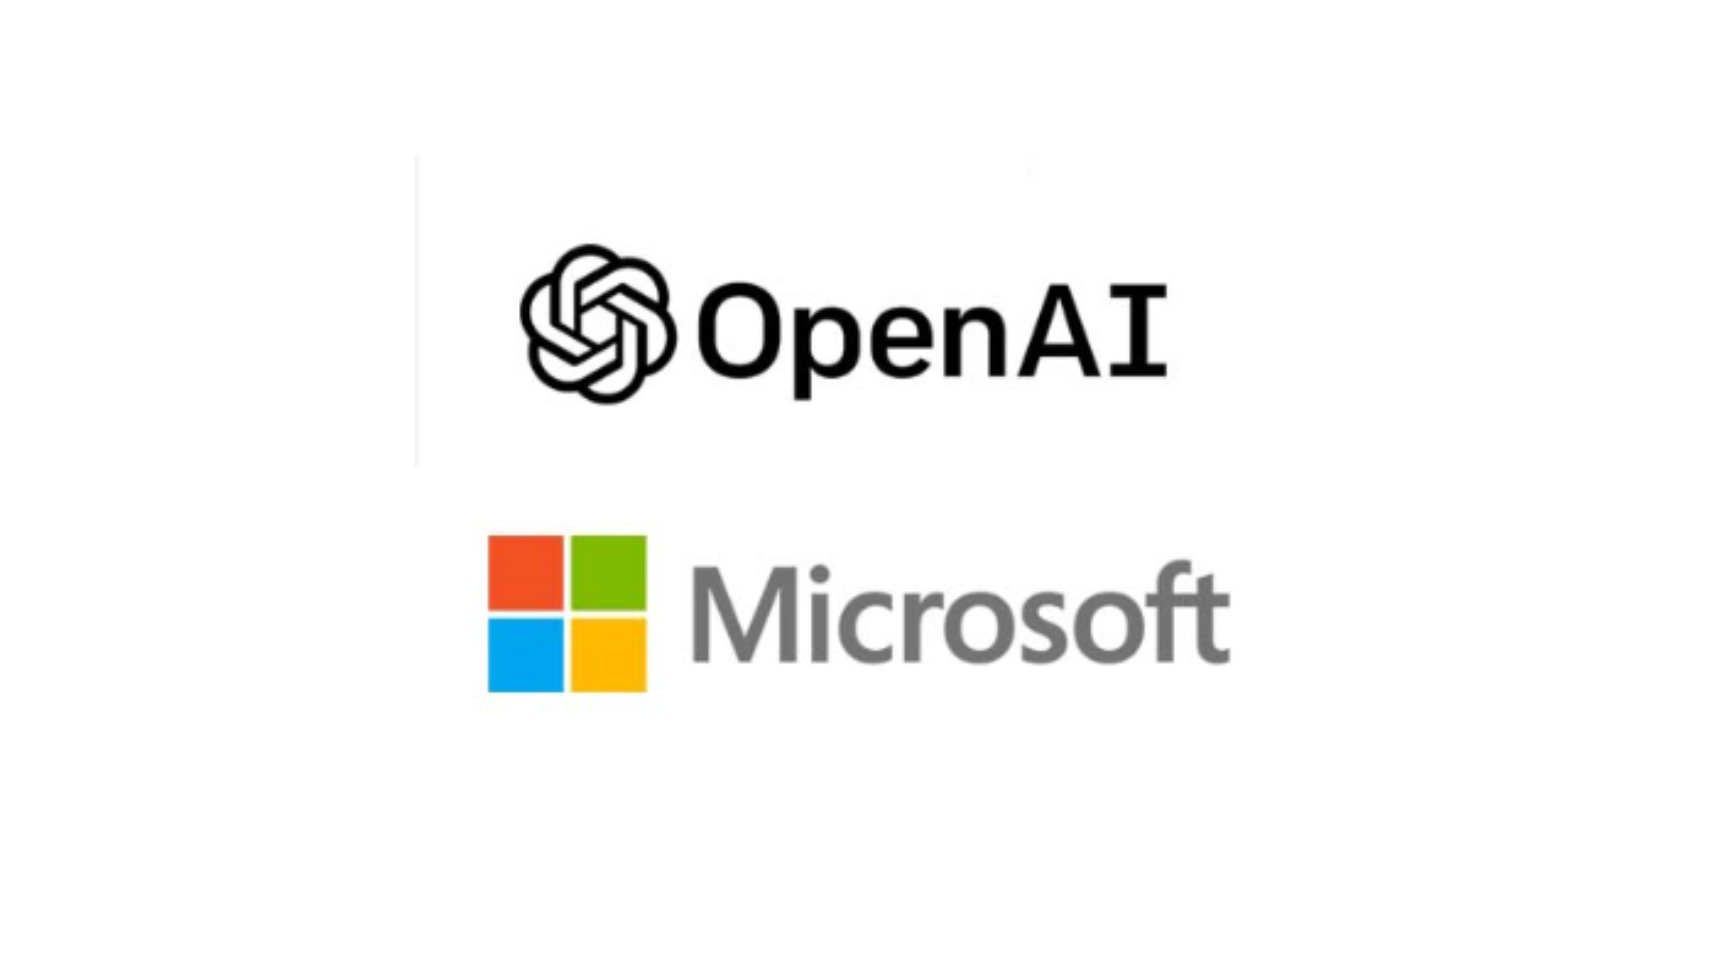 OpenAI forms exclusive computing partnership with Microsoft to